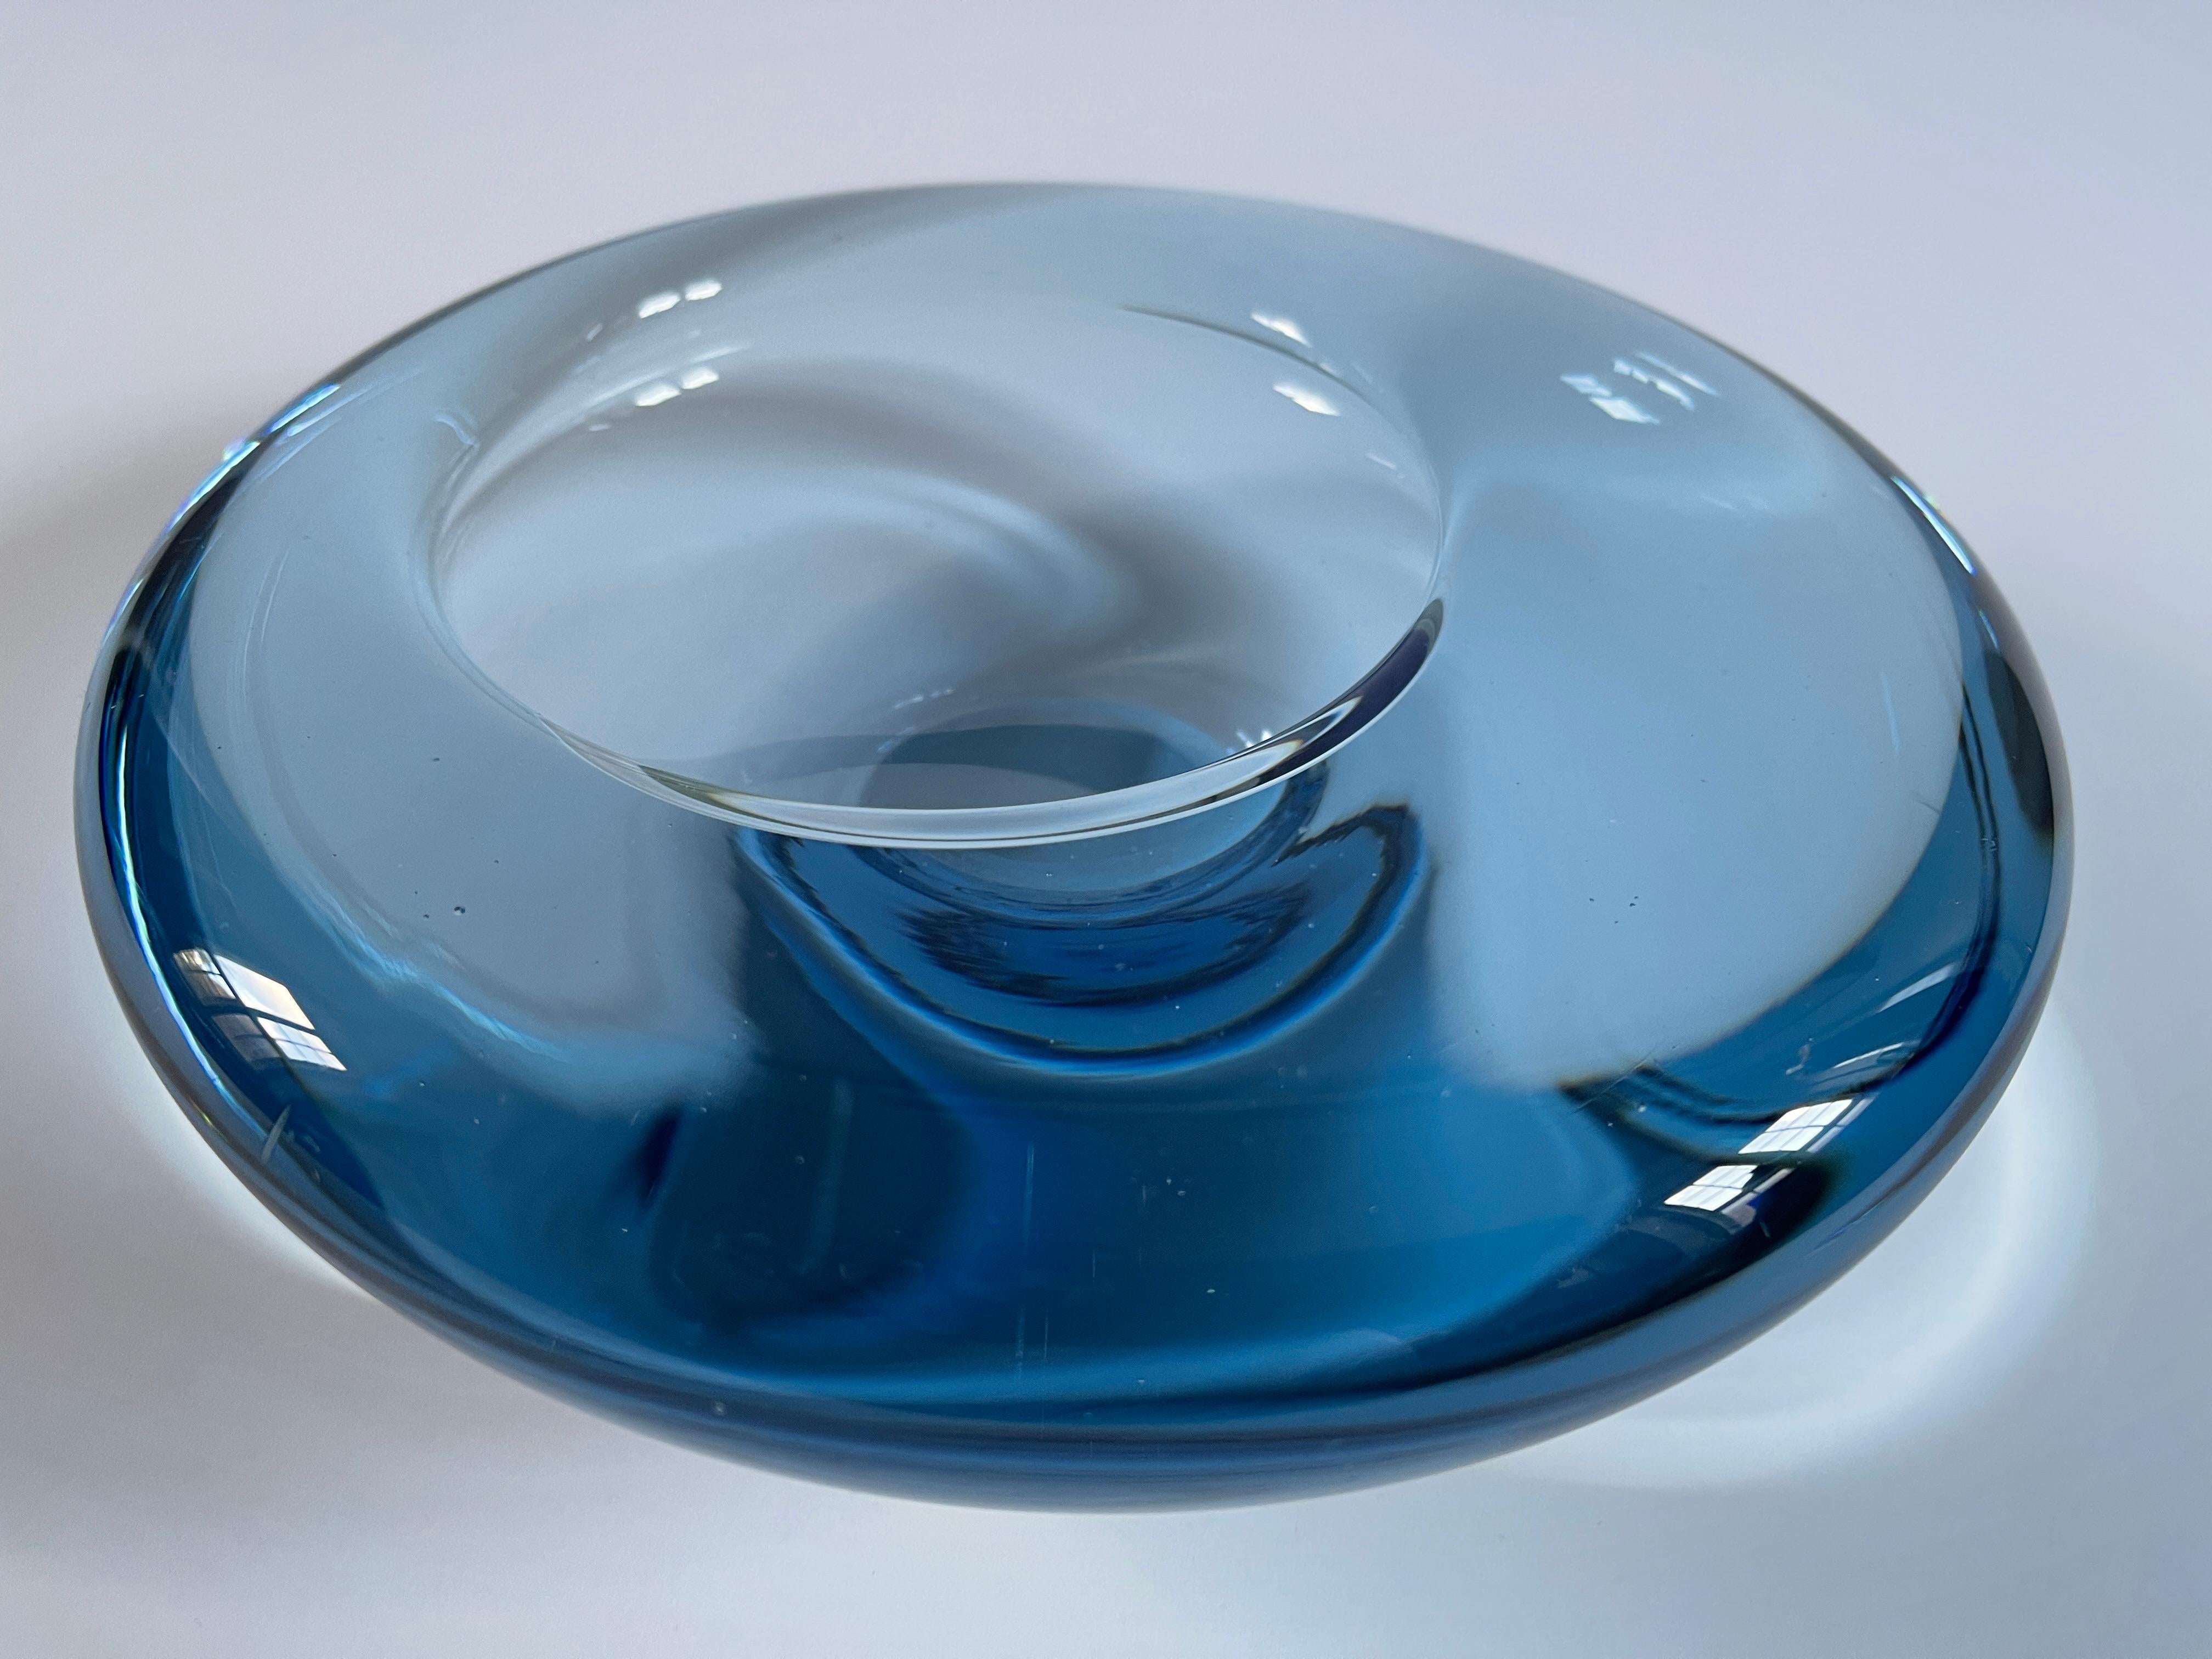 Stunning Danish mid century aquamarine glass sculptural bowl / vide poche designed and signed by Per Lutken for Holmegaard, Denmark, c. 1960's.
Signed by hand with engraved PL signature , HOLMEGAARD 16039.